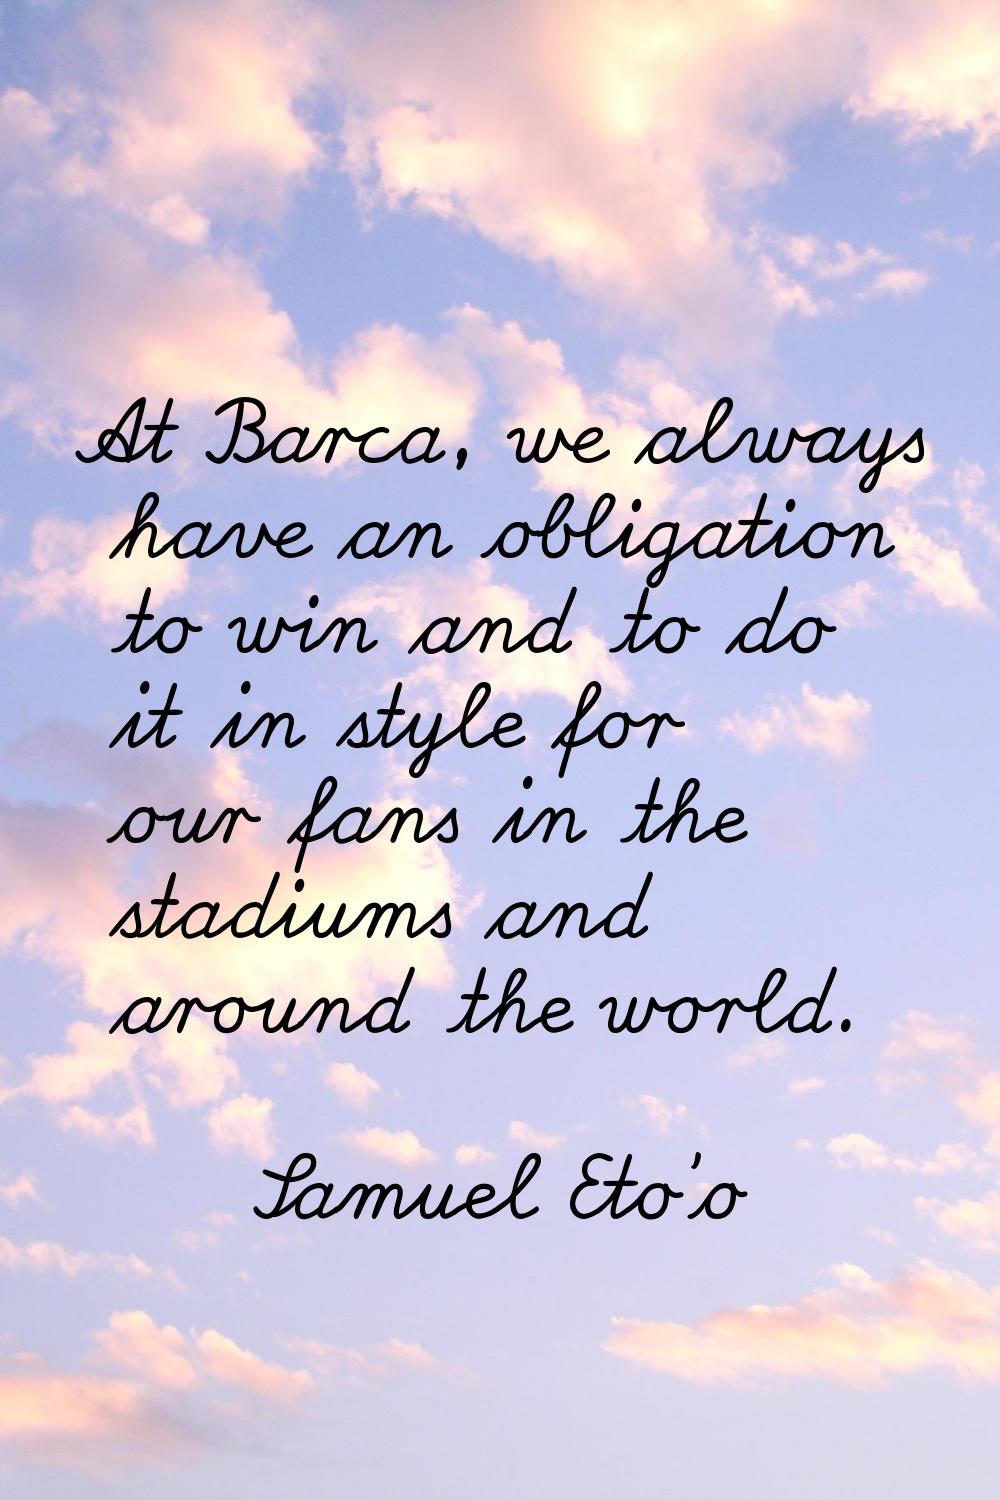 At Barca, we always have an obligation to win and to do it in style for our fans in the stadiums an